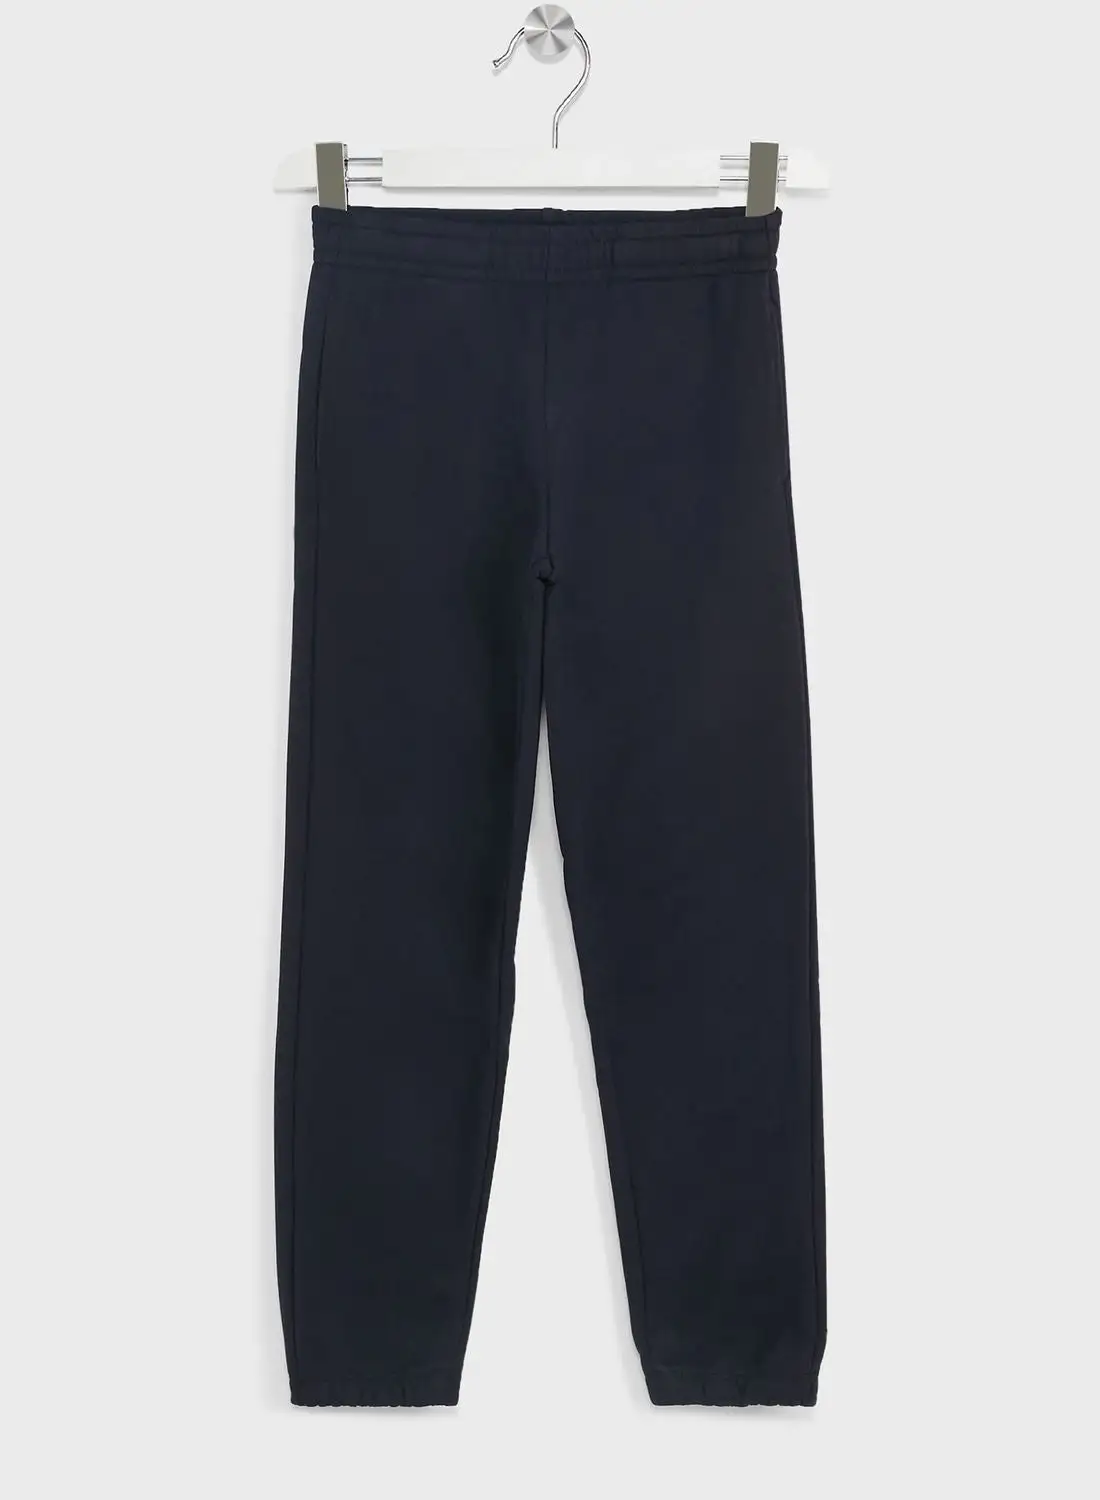 TOMMY HILFIGER Youth Essential Sweatpants